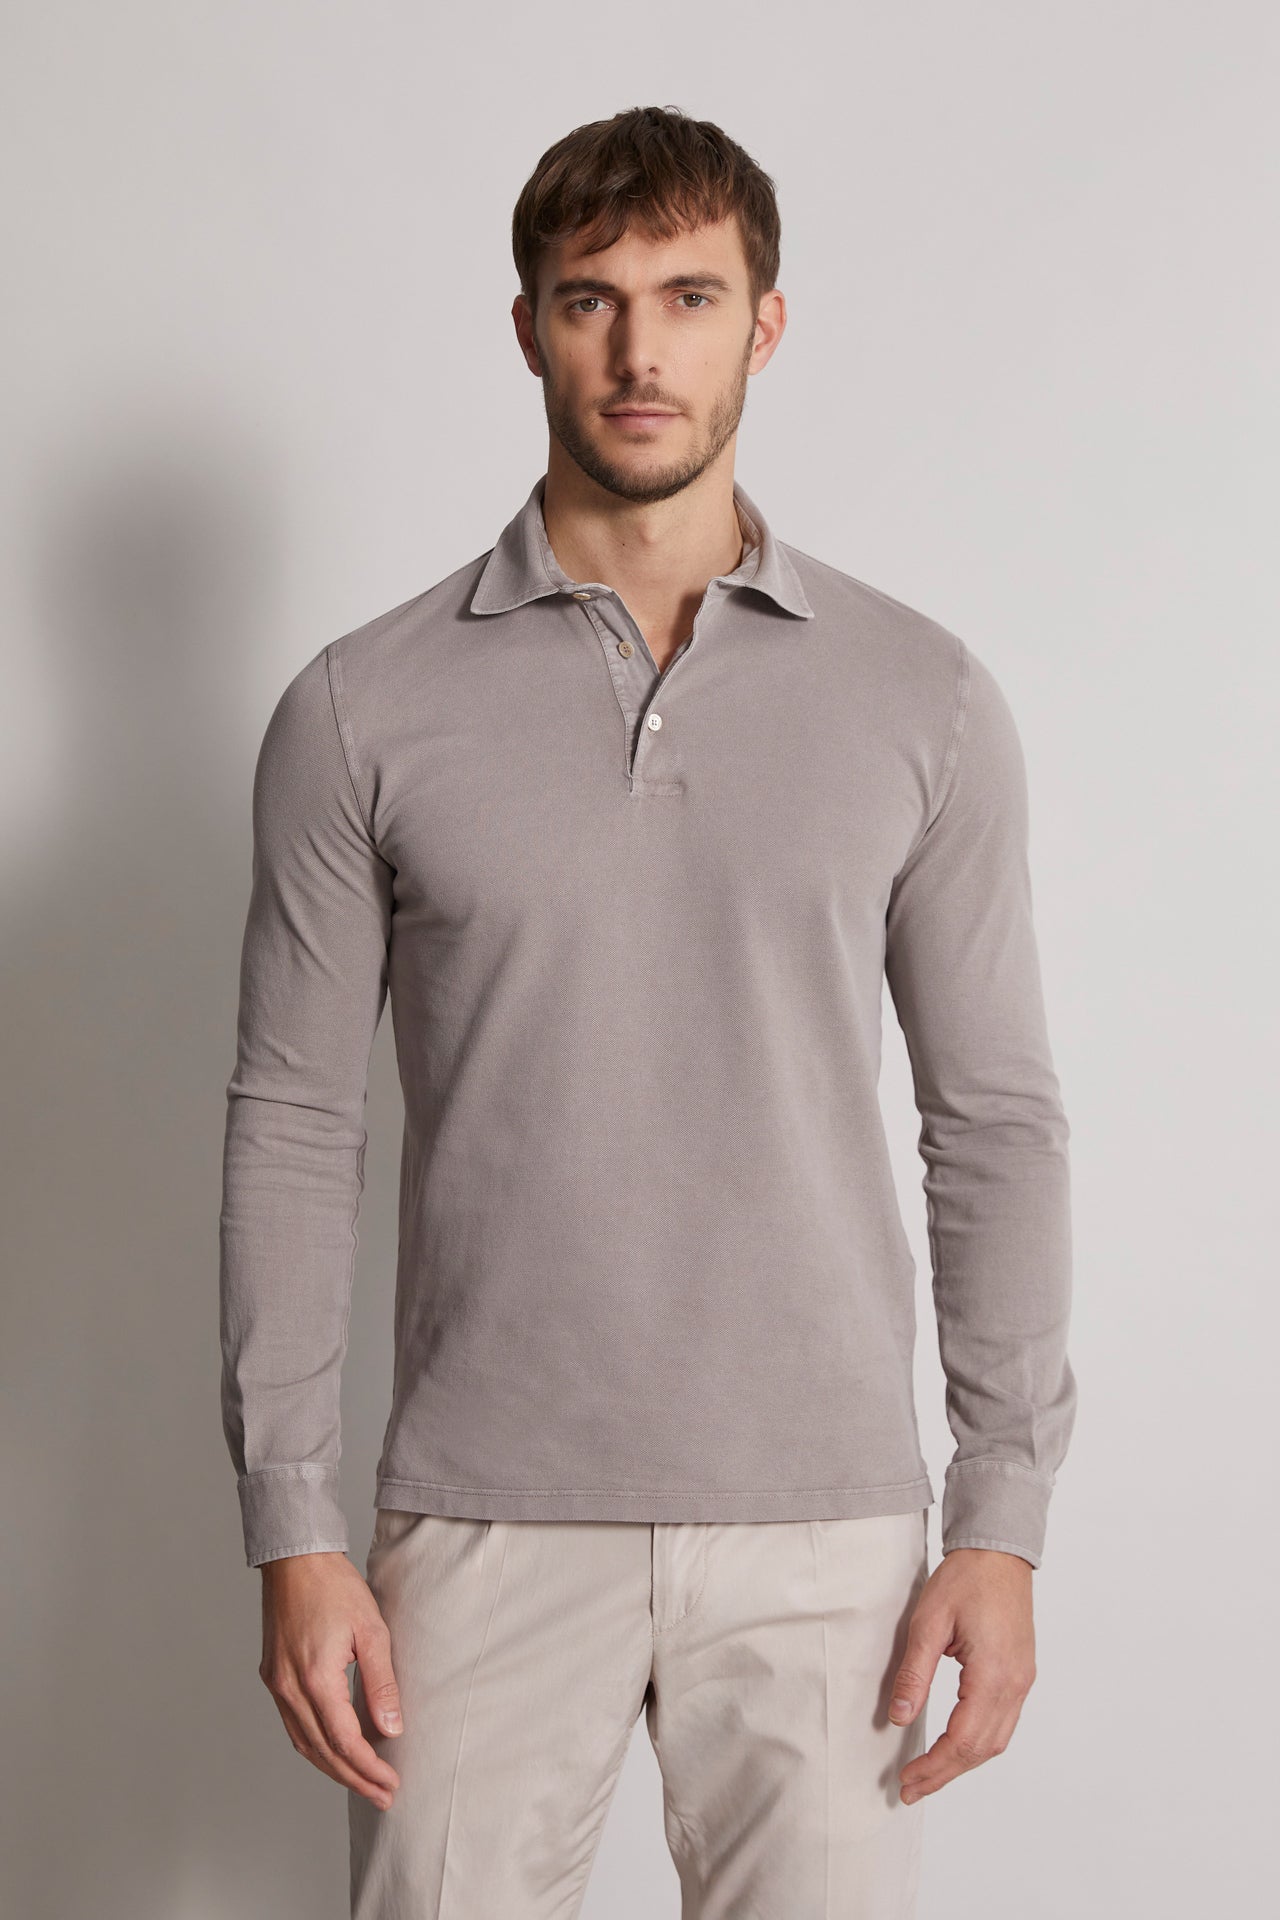 long sleeved cotton polo in grey-beige